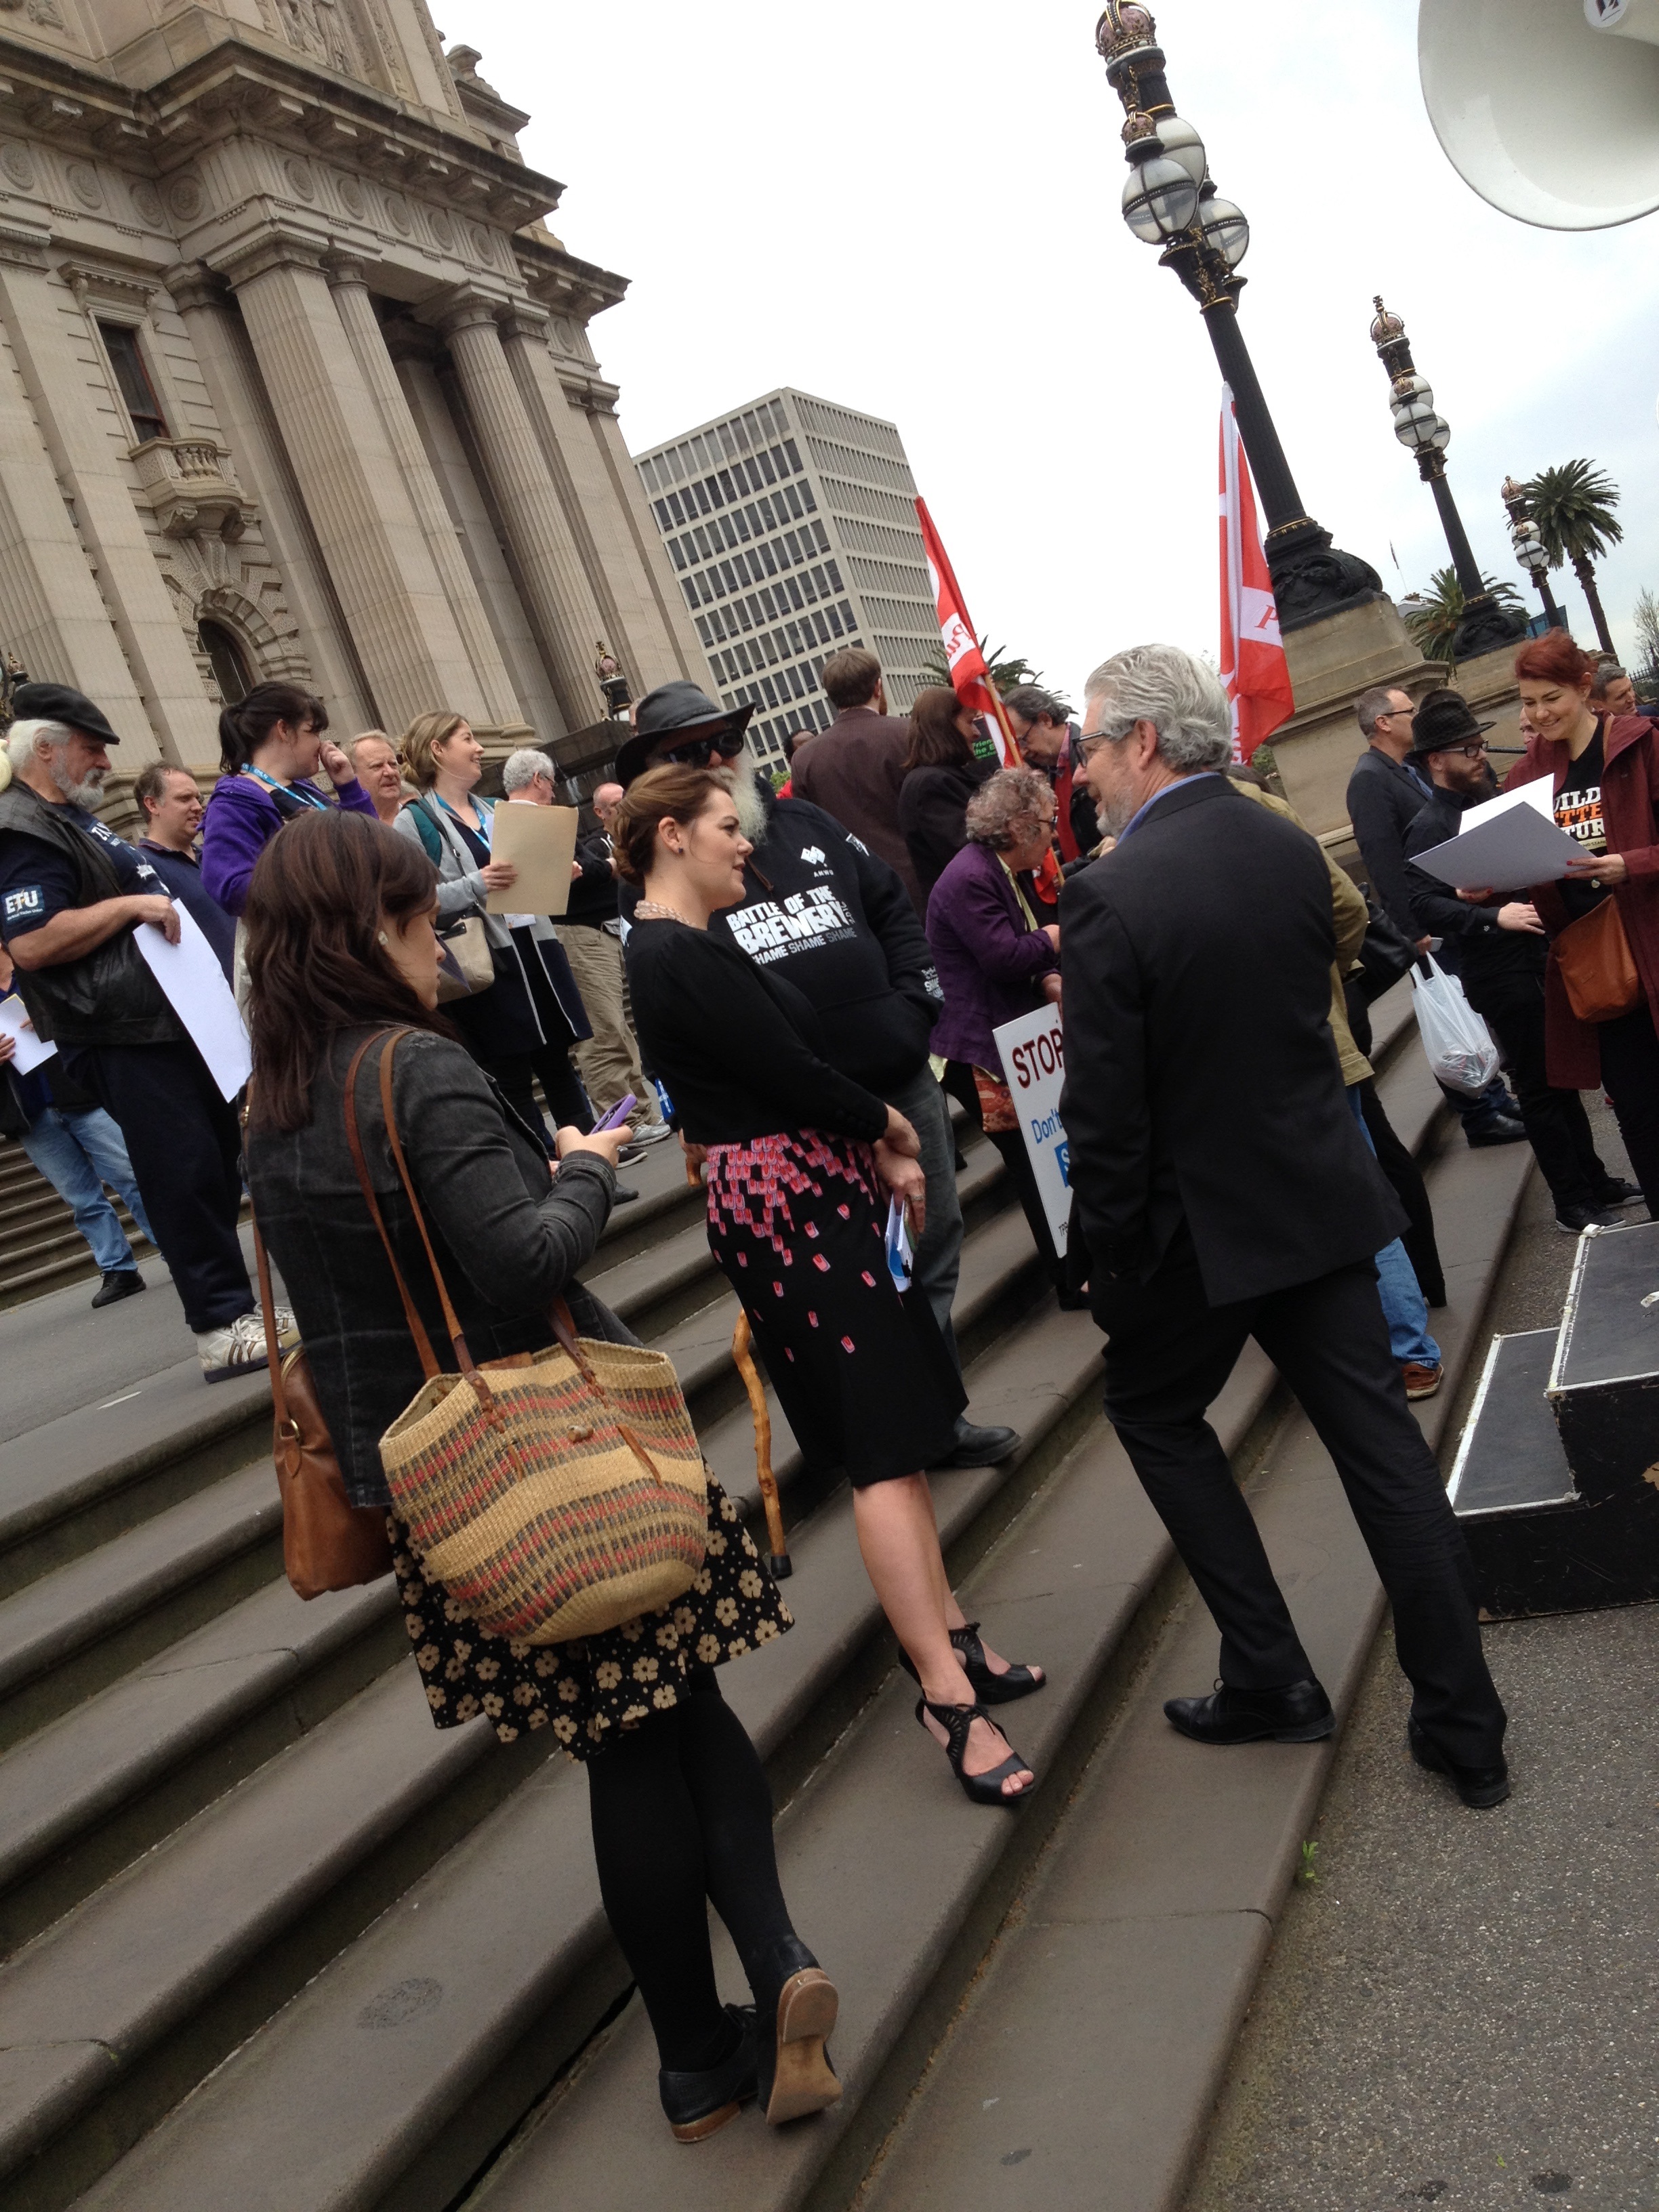 Sarah Hansen Young & Dave Oliver @ TPP rally Melbourne 7-10-16